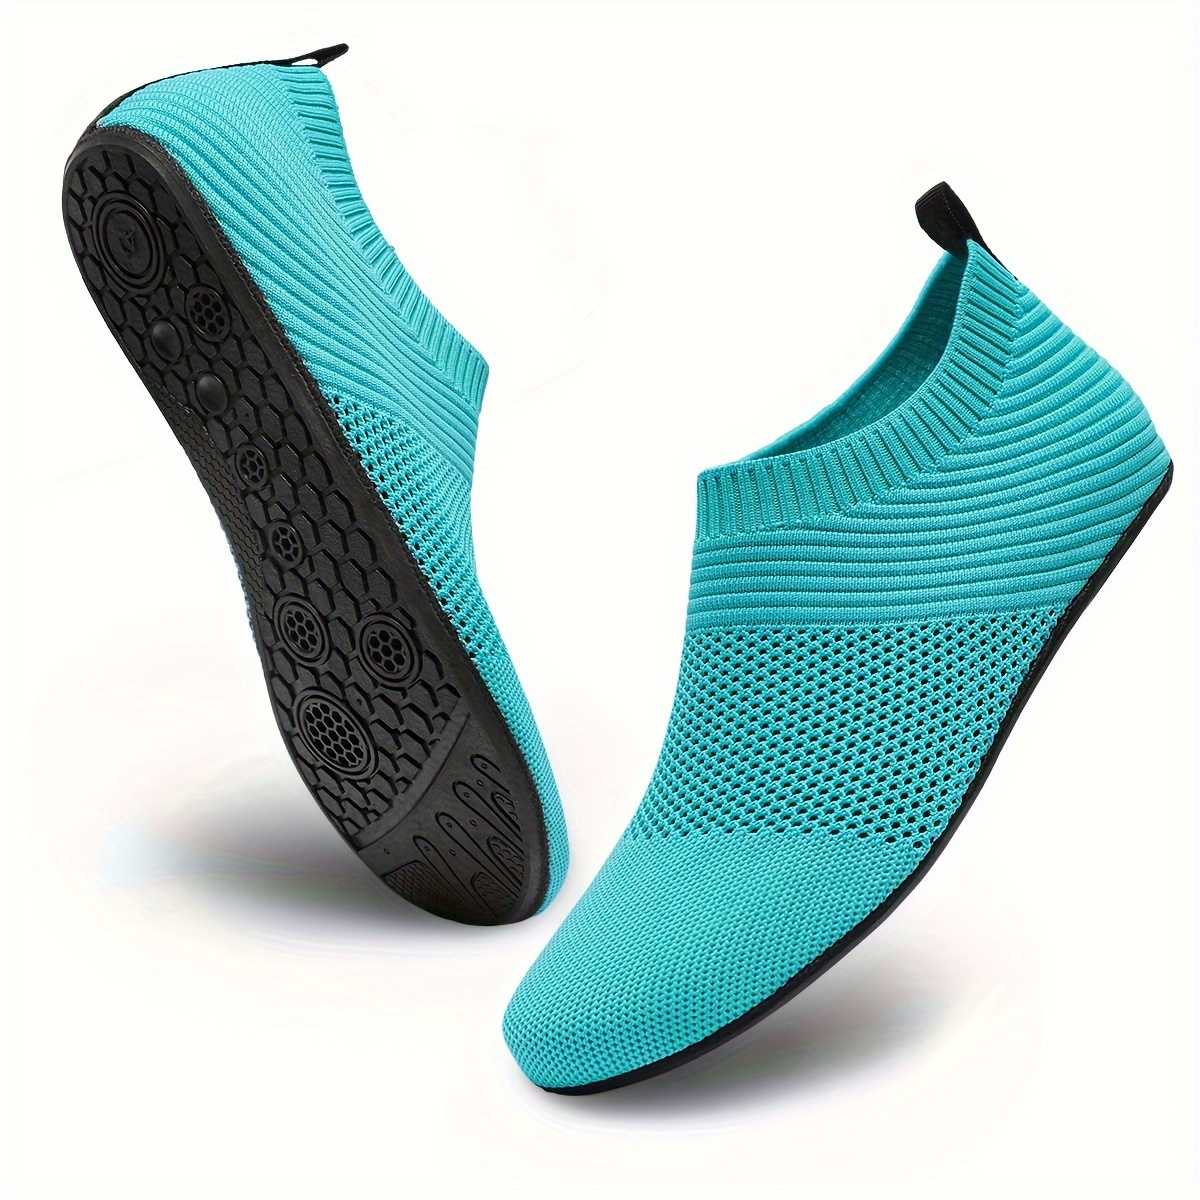 

Unisex Aqua Socks, Quick-dry Barefoot Water Shoes For Beach, Swim, Surf, Water Sports, Breathable Fabric, Lightweight And Foldable, Non-slip Sole